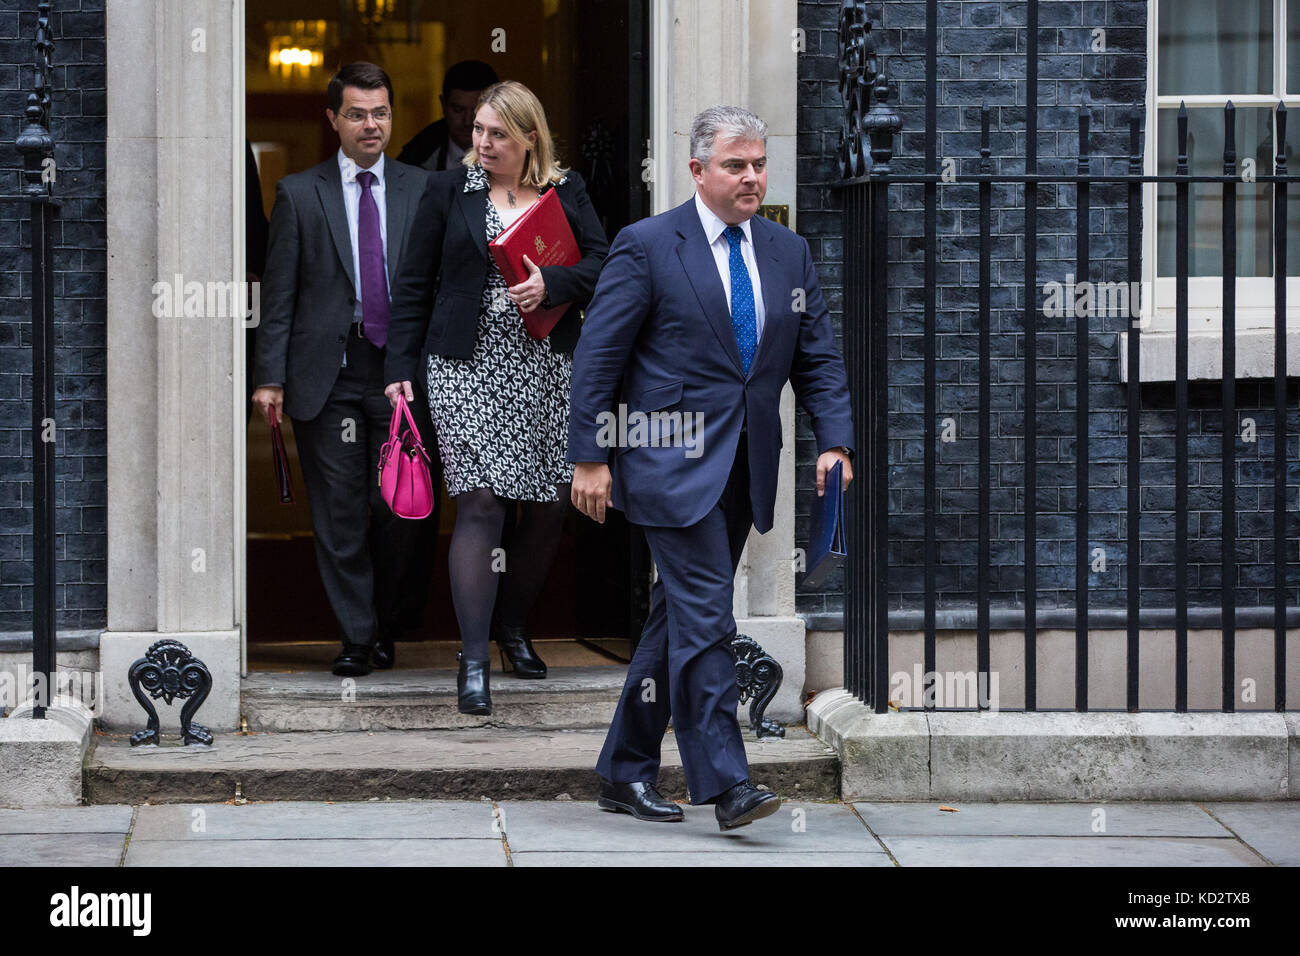 London, UK. 10th Oct, 2017. Brandon Lewis MP, Minister of State, Karen Bradley MP, Secretary of State for Culture, Media and Sport, and James Brokenshire MP, Secretary of State for Northern Ireland, leave 10 Downing Street following a Cabinet meeting. Credit: Mark Kerrison/Alamy Live News Stock Photo